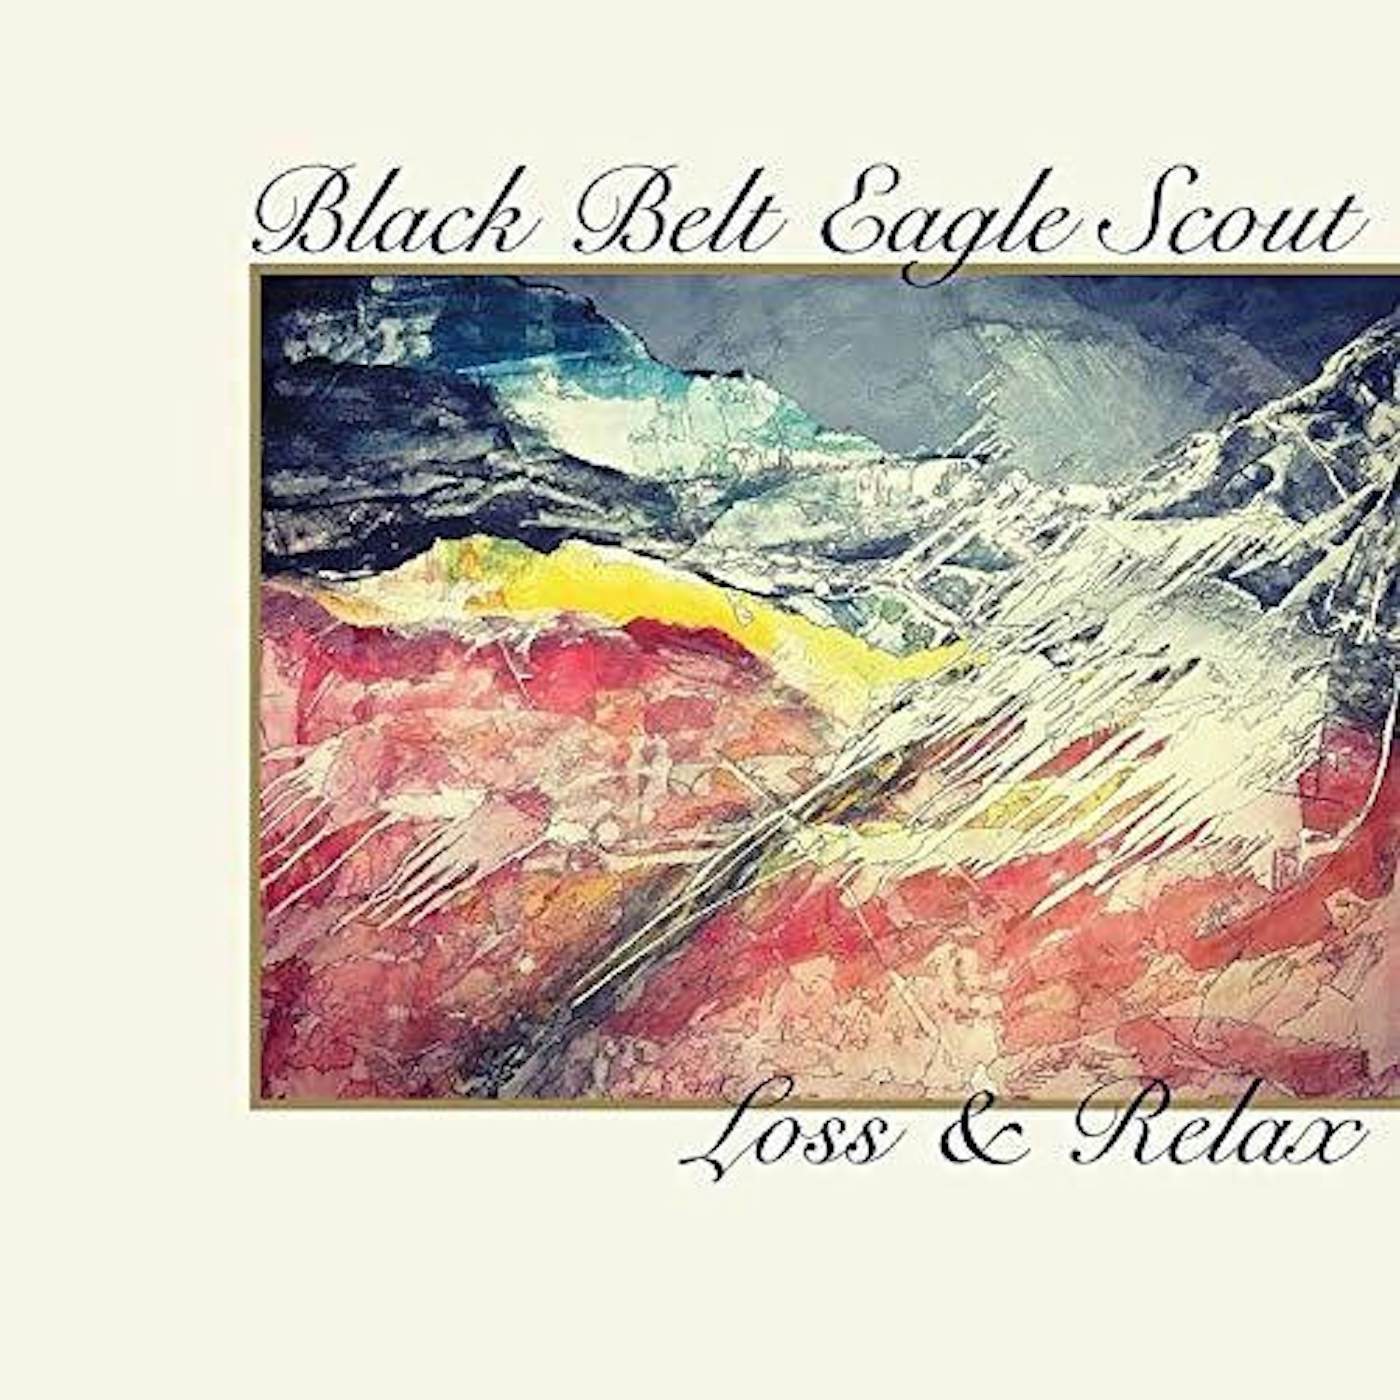 Black Belt Eagle Scout LOSS & RELAX / HALF COLORED HAIR CD